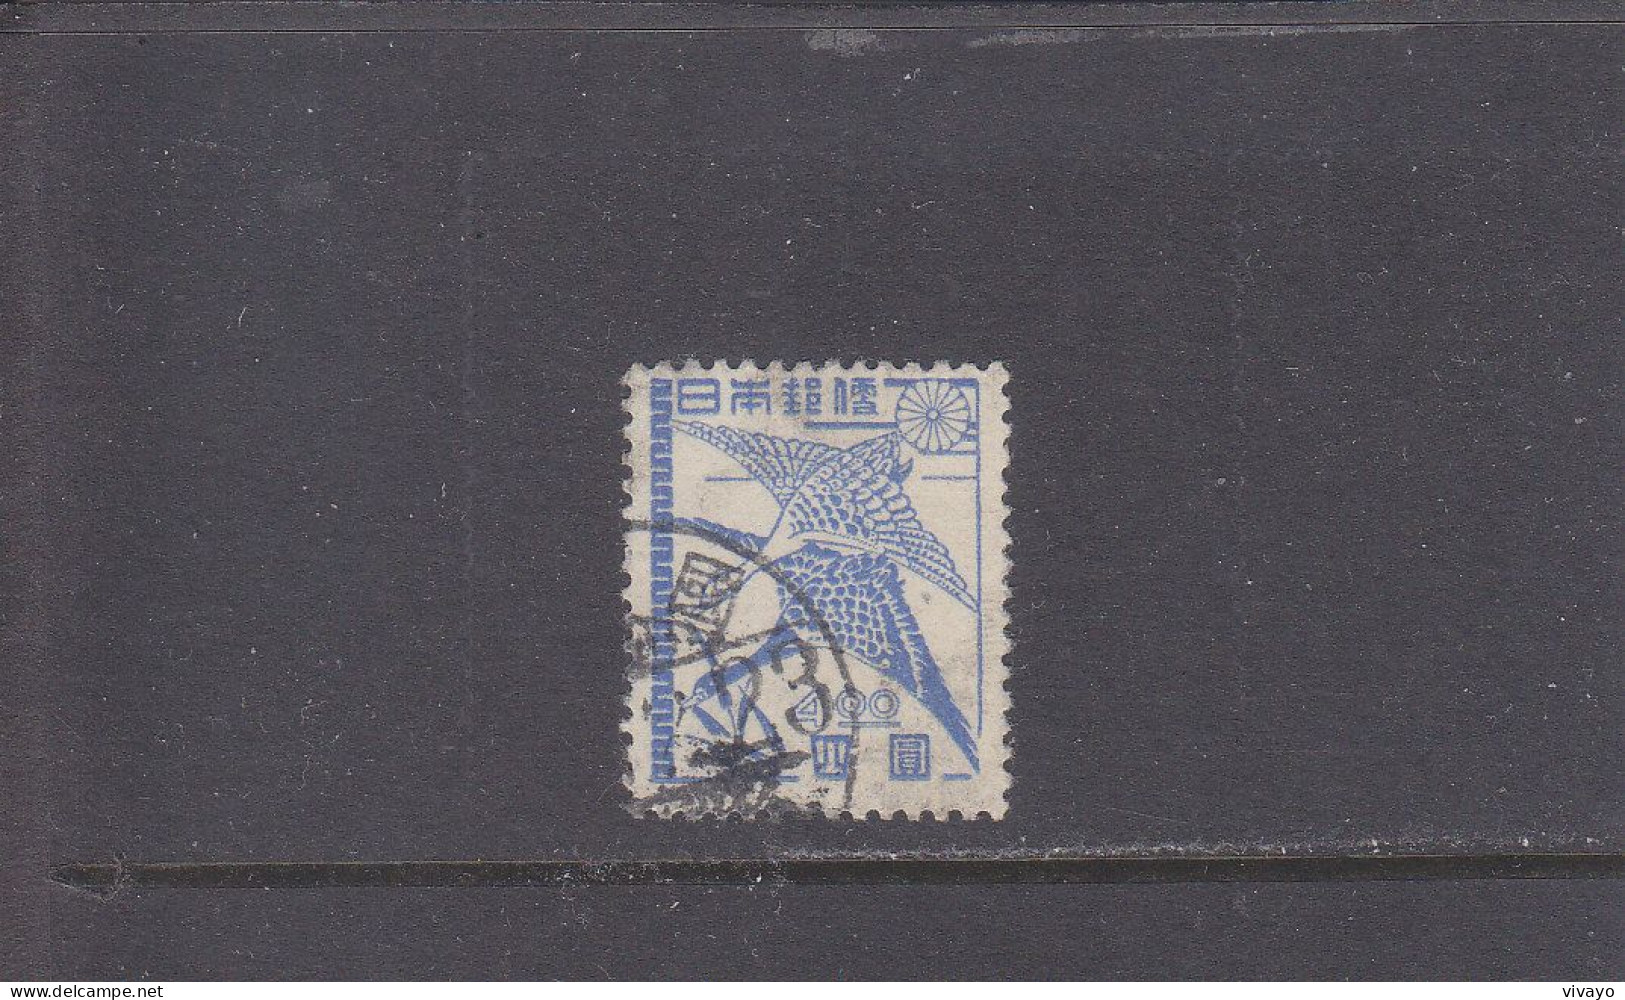 JAPAN - JAPON - O / FINE CANCELLED - 1952 - FLYING DUCKS , OIES - WITHOUT / SANS WATERMARK -  Yv. 380C  Mi. 557 - Used Stamps